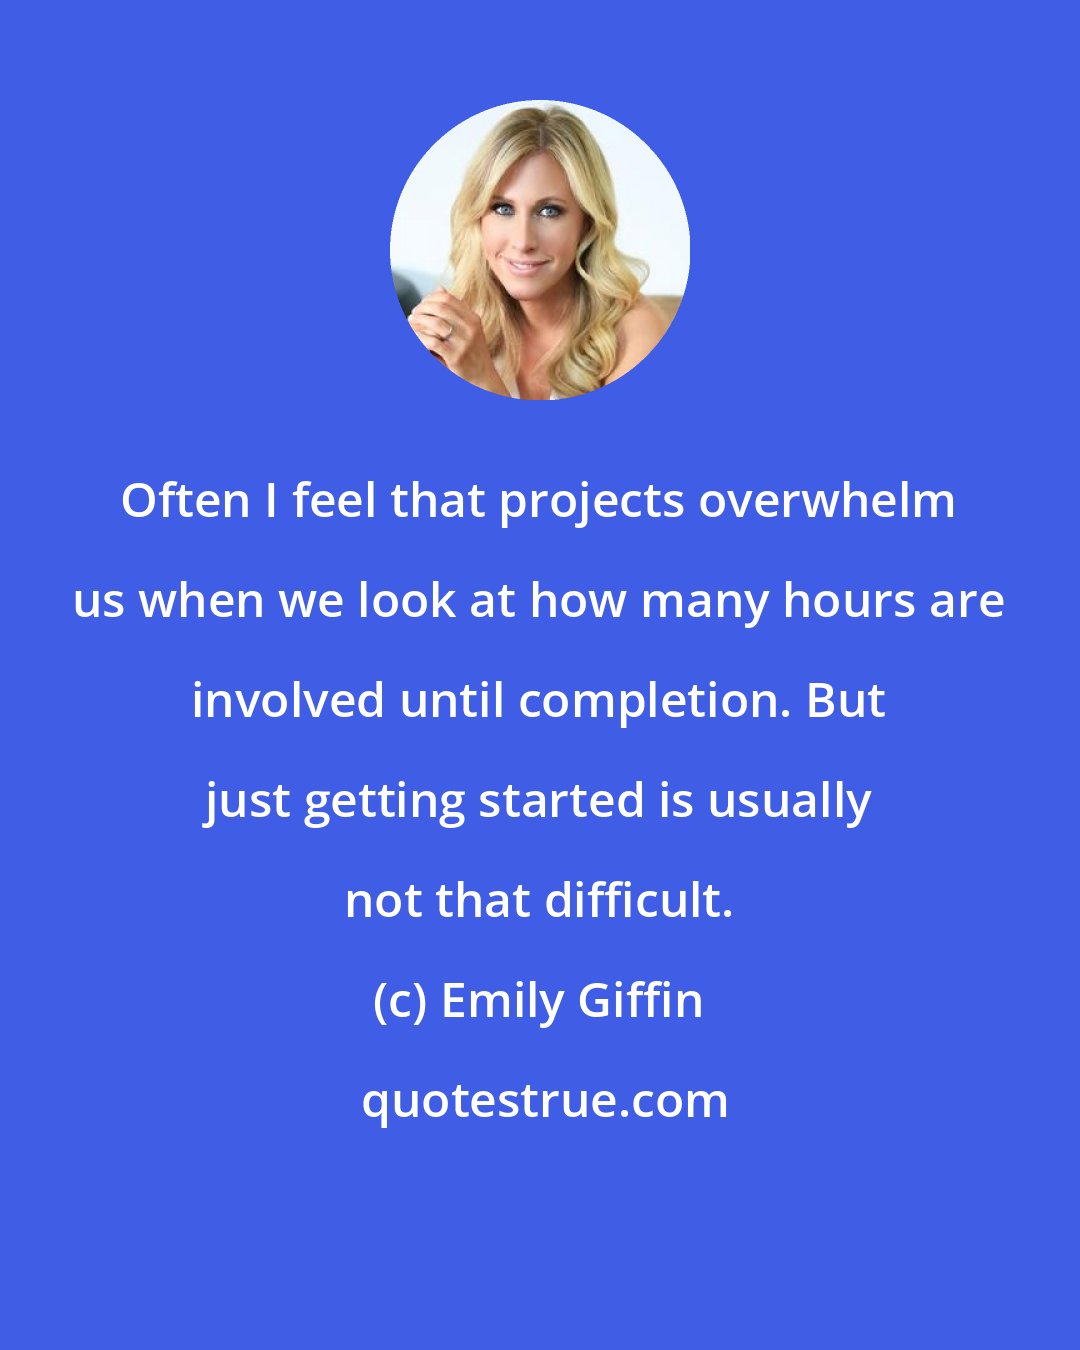 Emily Giffin: Often I feel that projects overwhelm us when we look at how many hours are involved until completion. But just getting started is usually not that difficult.